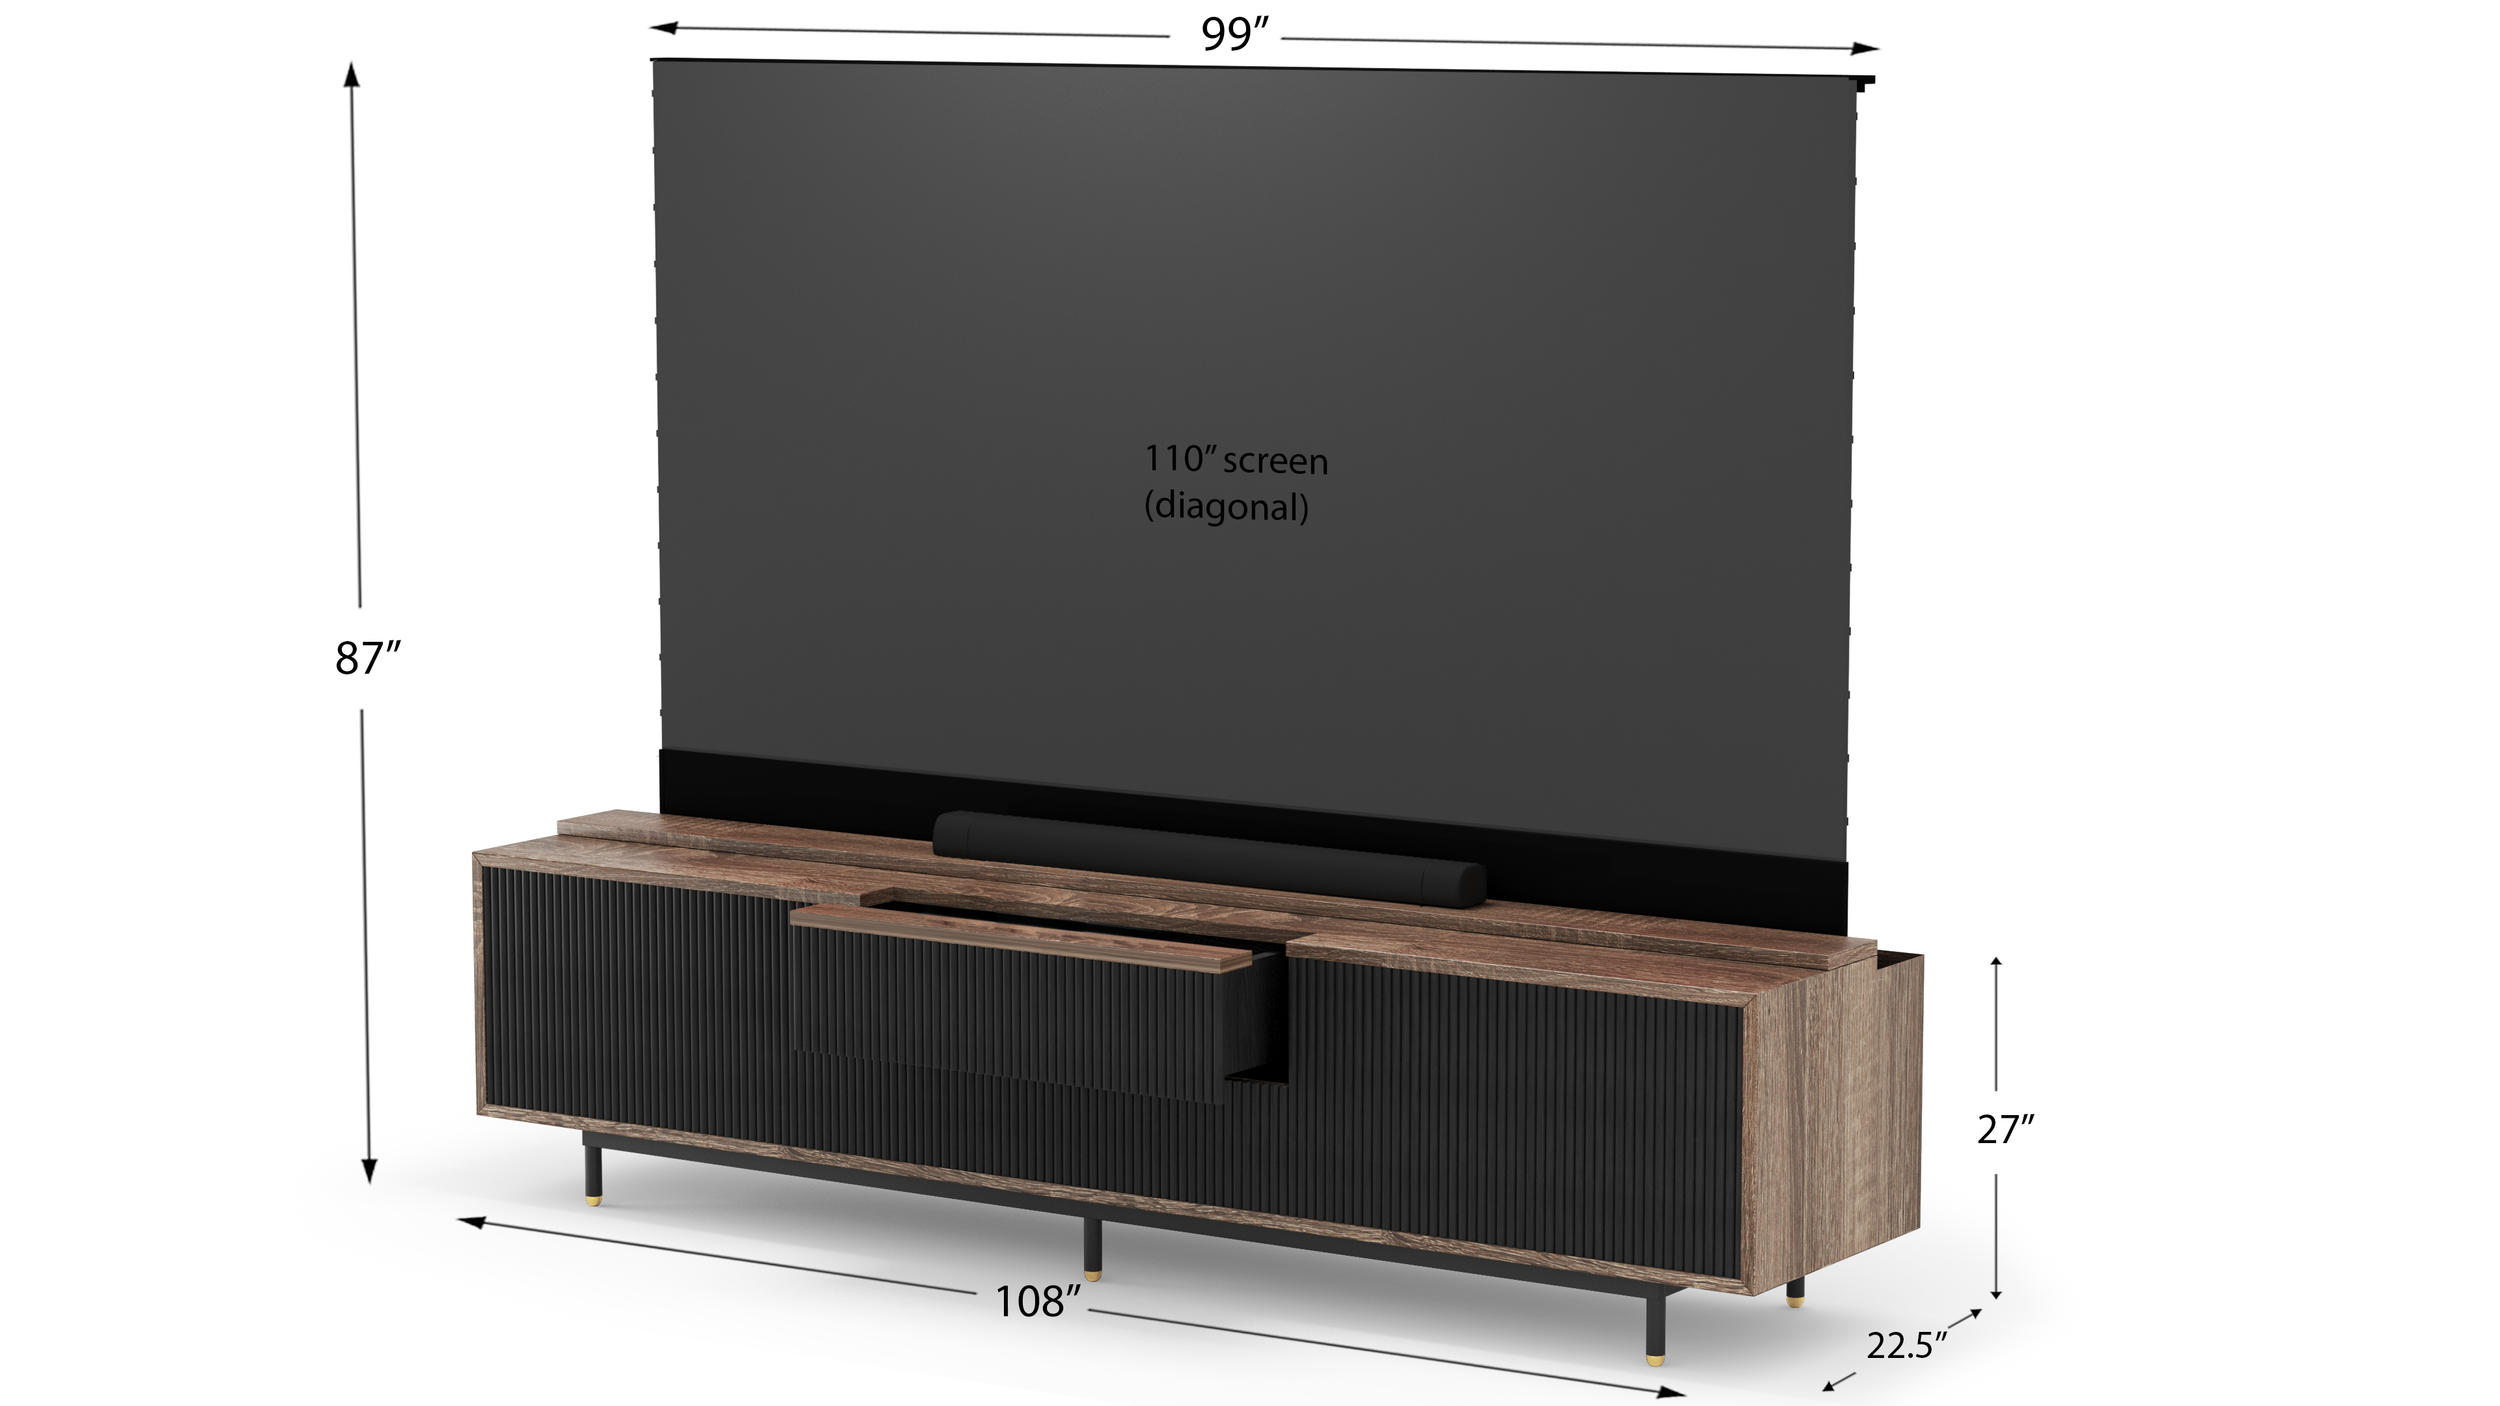 Render Dimensions 110 inch screen.png